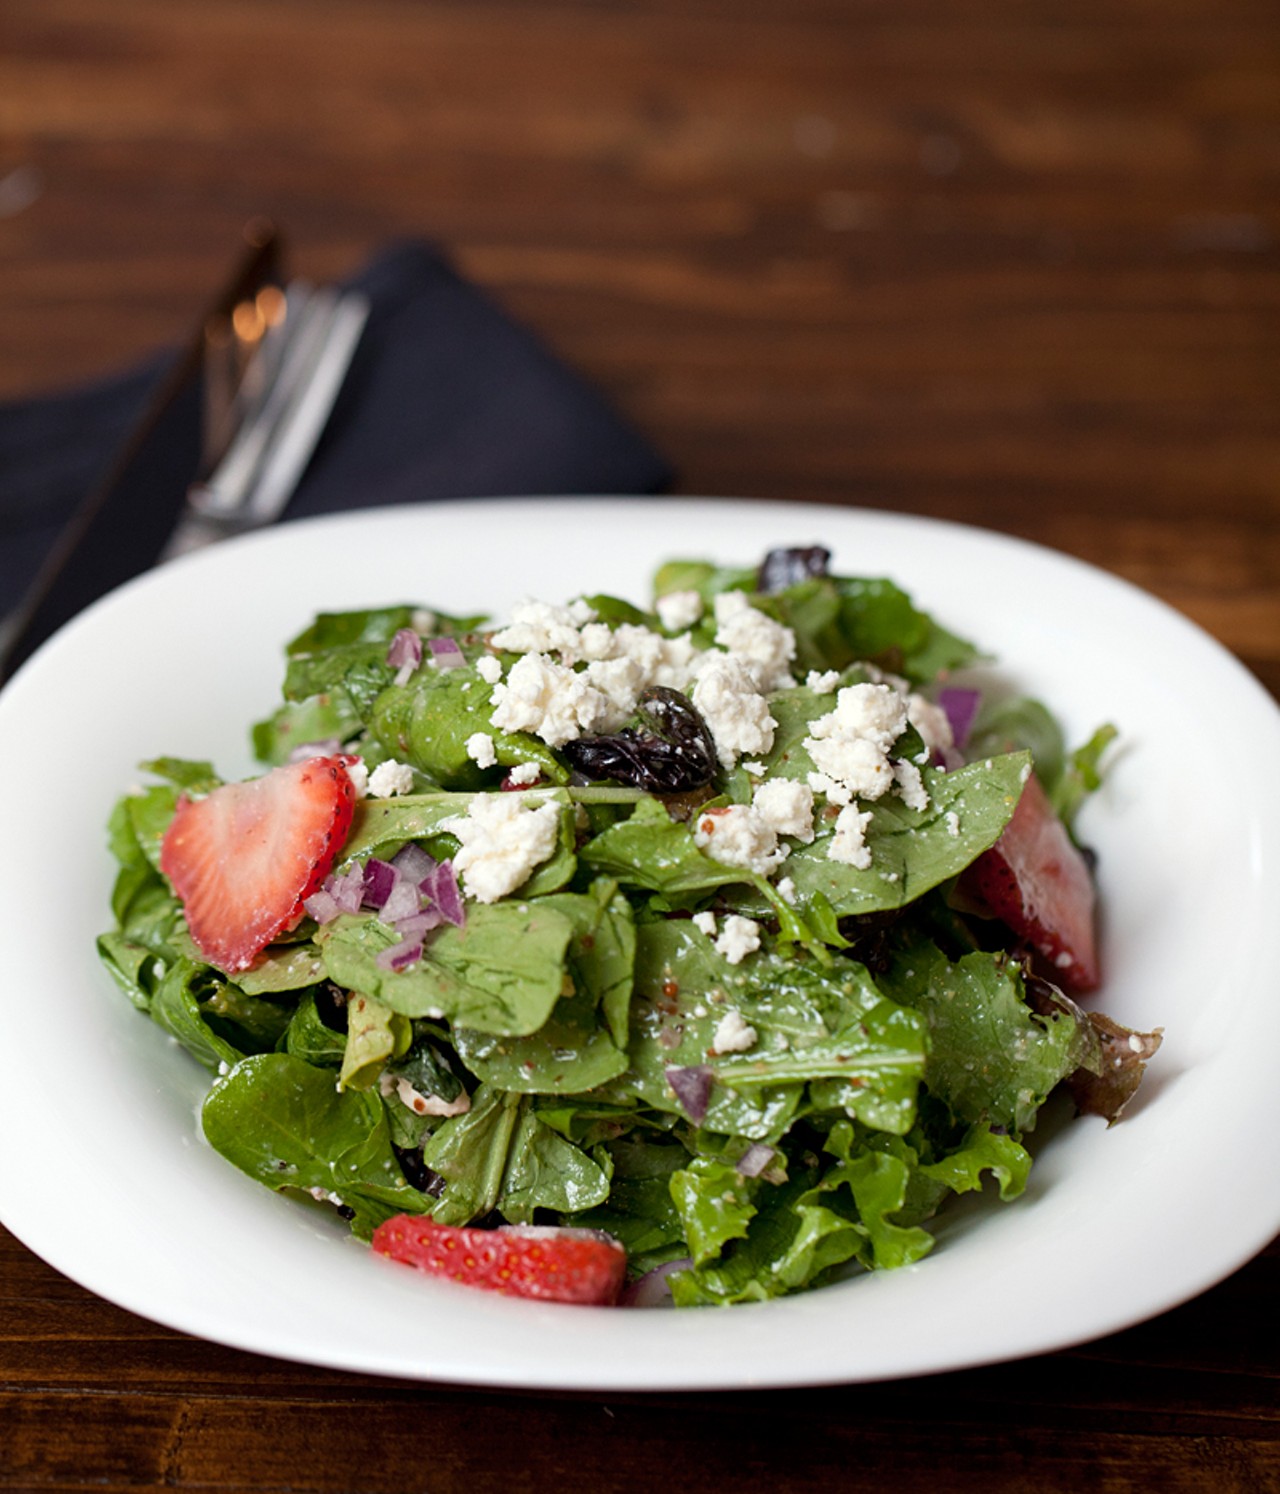 The "Strawberry Fields" salad is spring mix, strawberries, feta, red onion, sage, mint and candied walnuts with a white balsamic vinaigrette dressing.